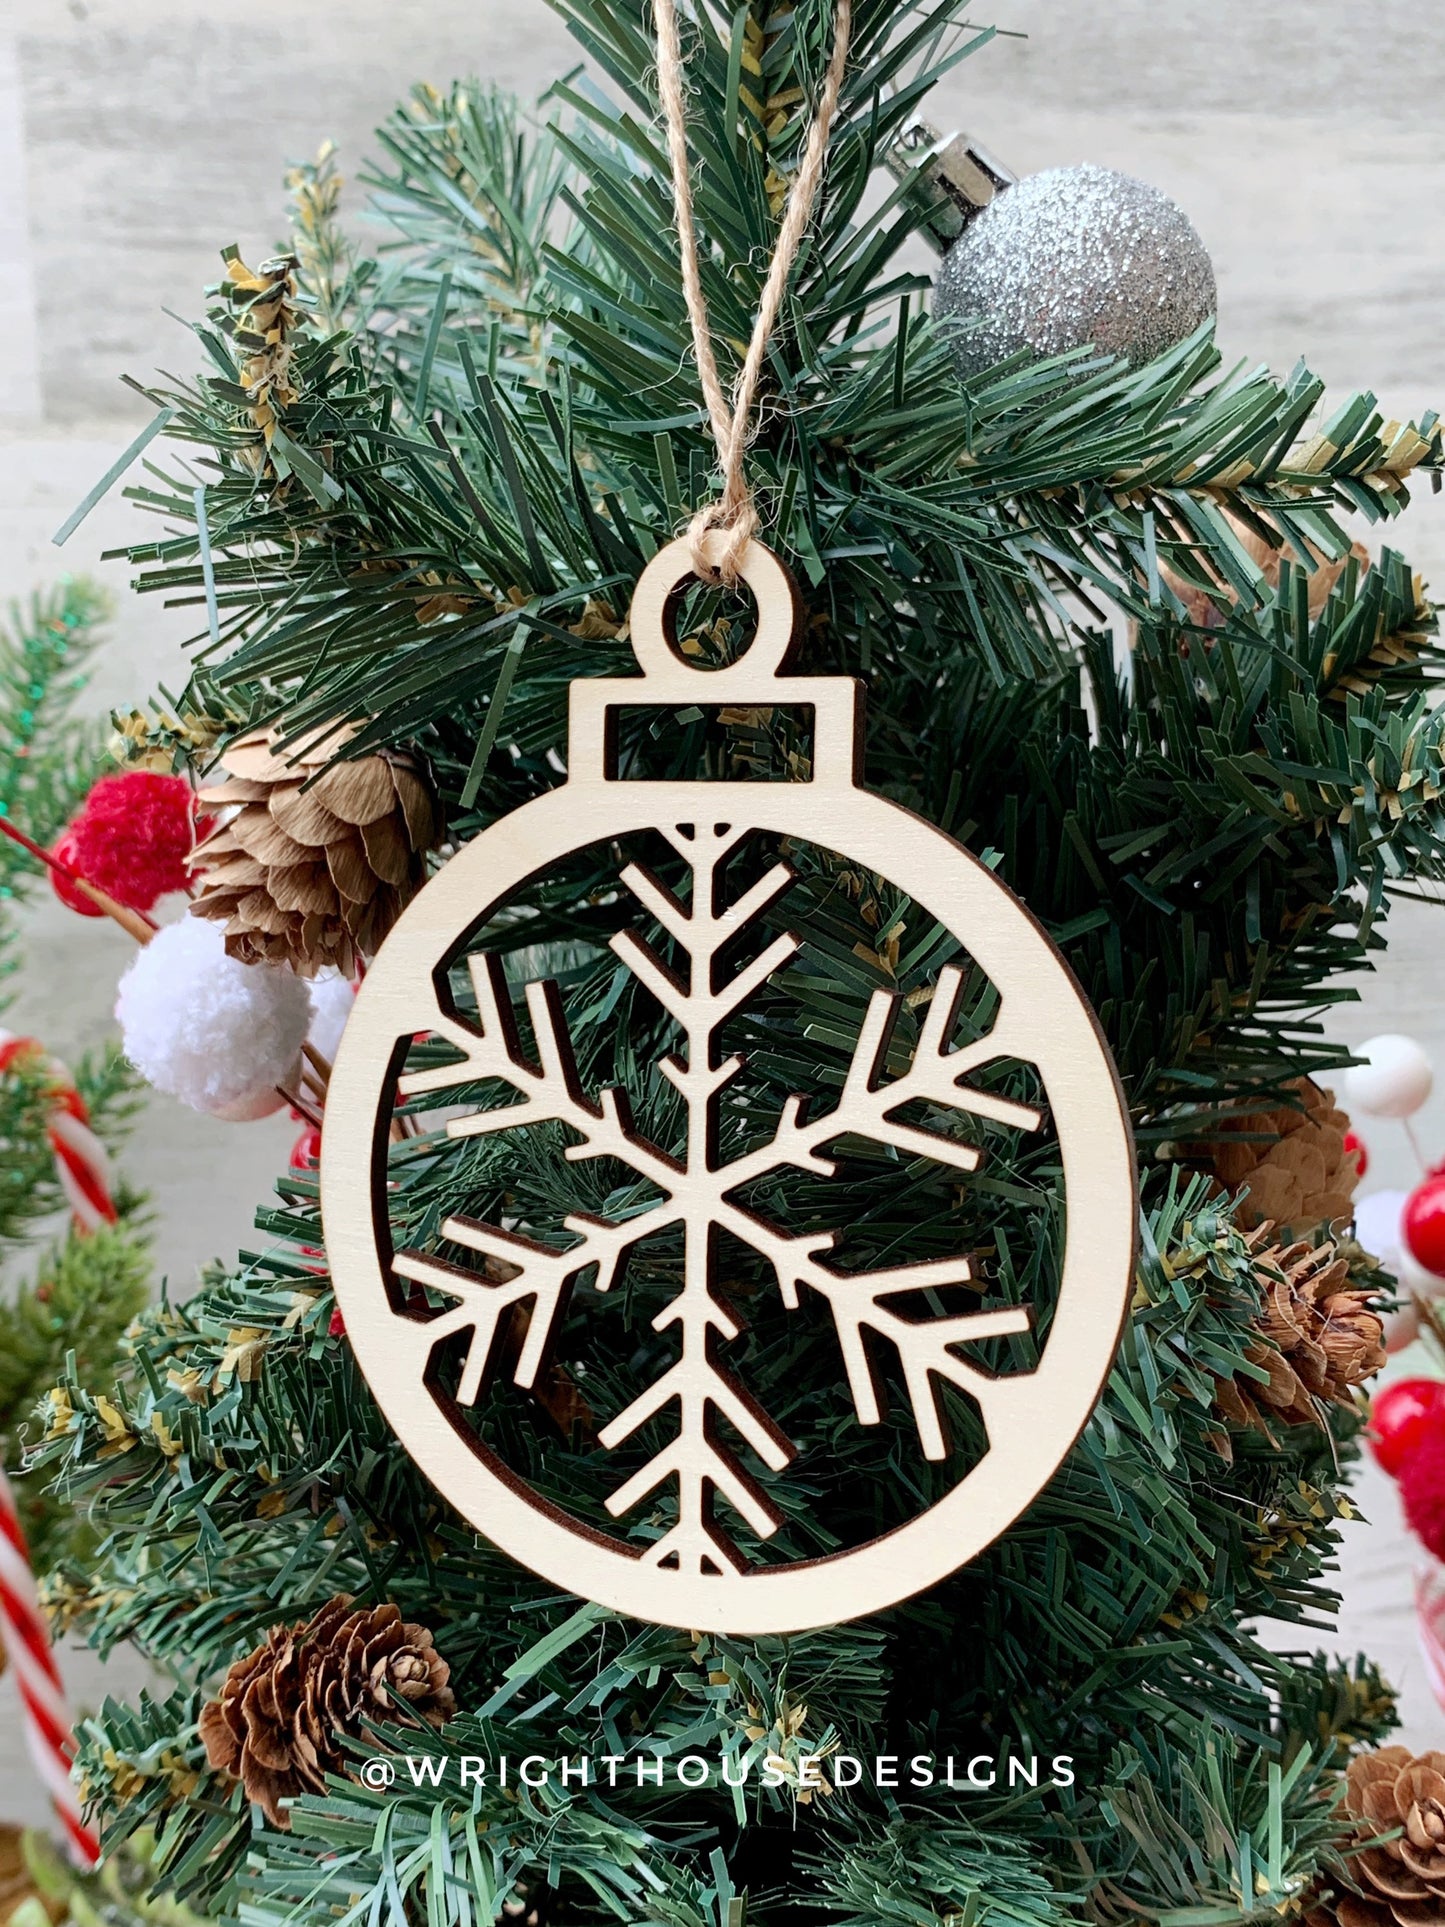 Painted Wooden Snowflake - Christmas Tree Ornaments -Winter Decorations